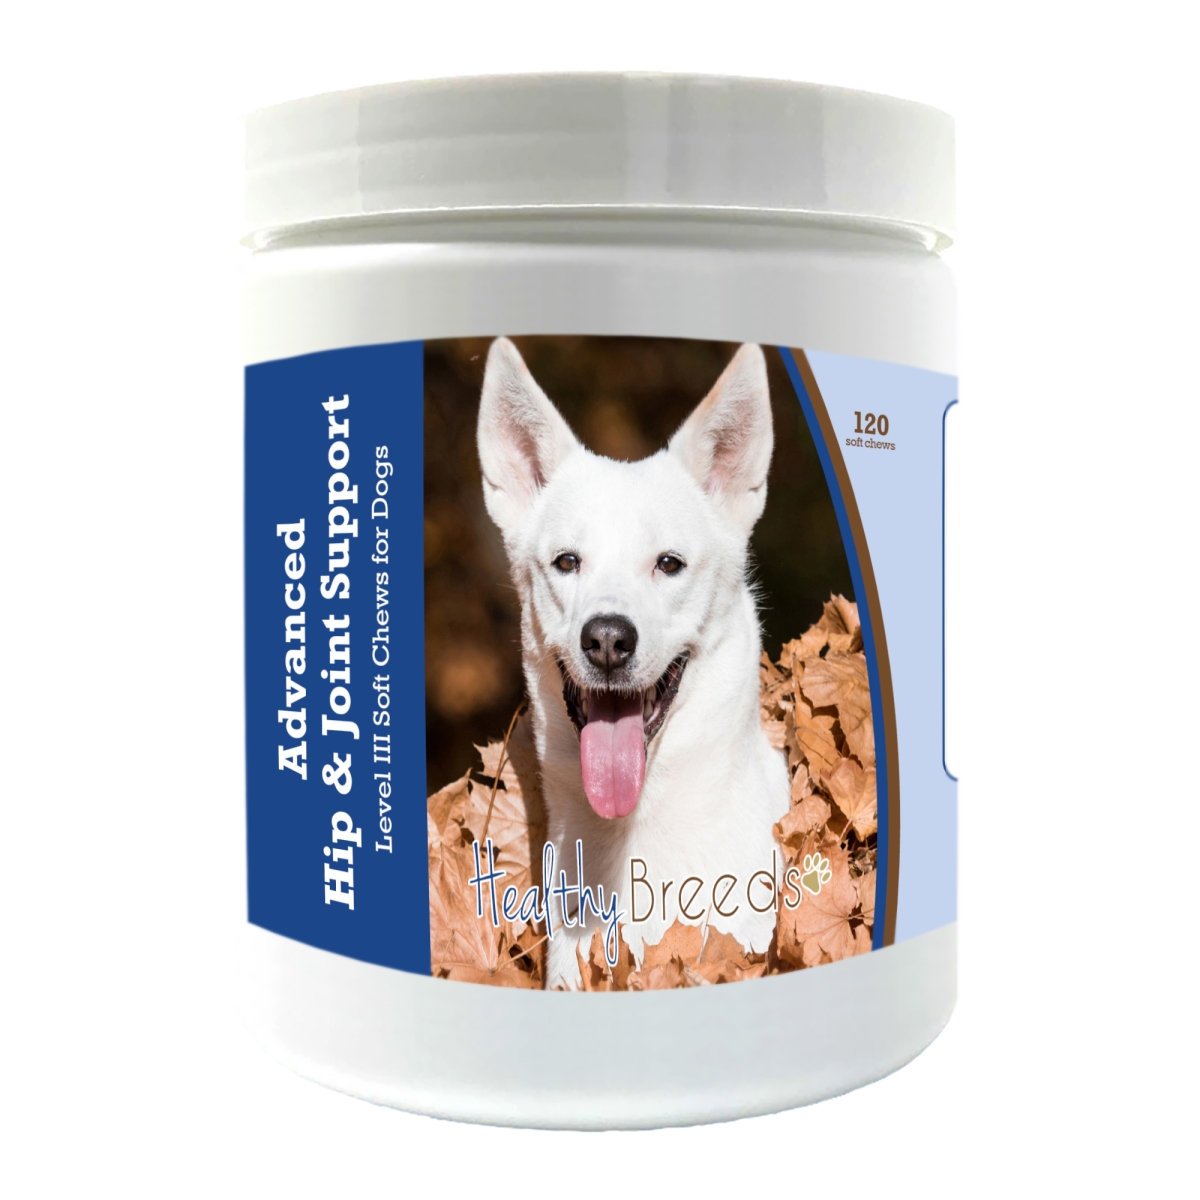 Picture of Healthy Breeds 192959897845 Canaan Dog Advanced Hip & Joint Support Level III Soft Chews for Dogs